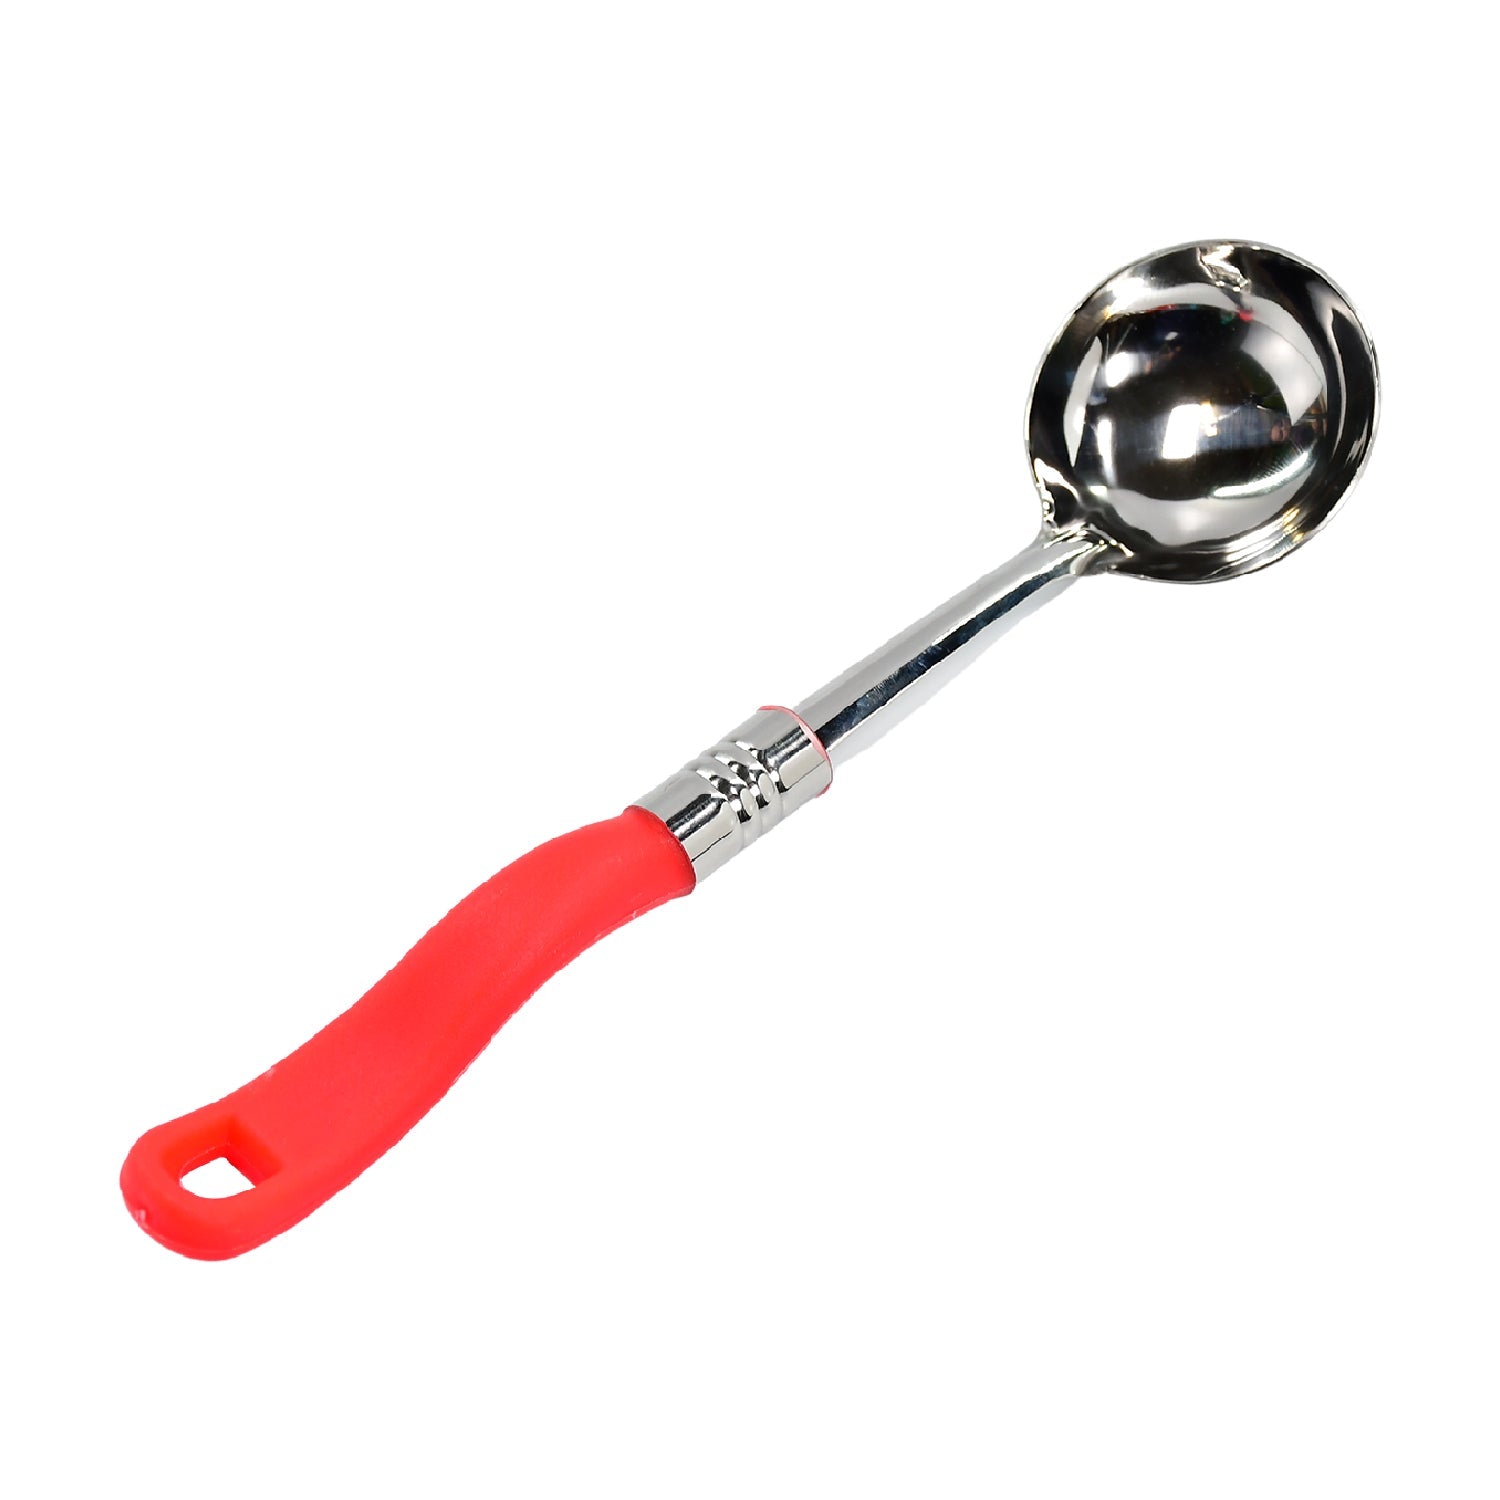 2937 Dinner Spoons Durable Round Spoons DeoDap